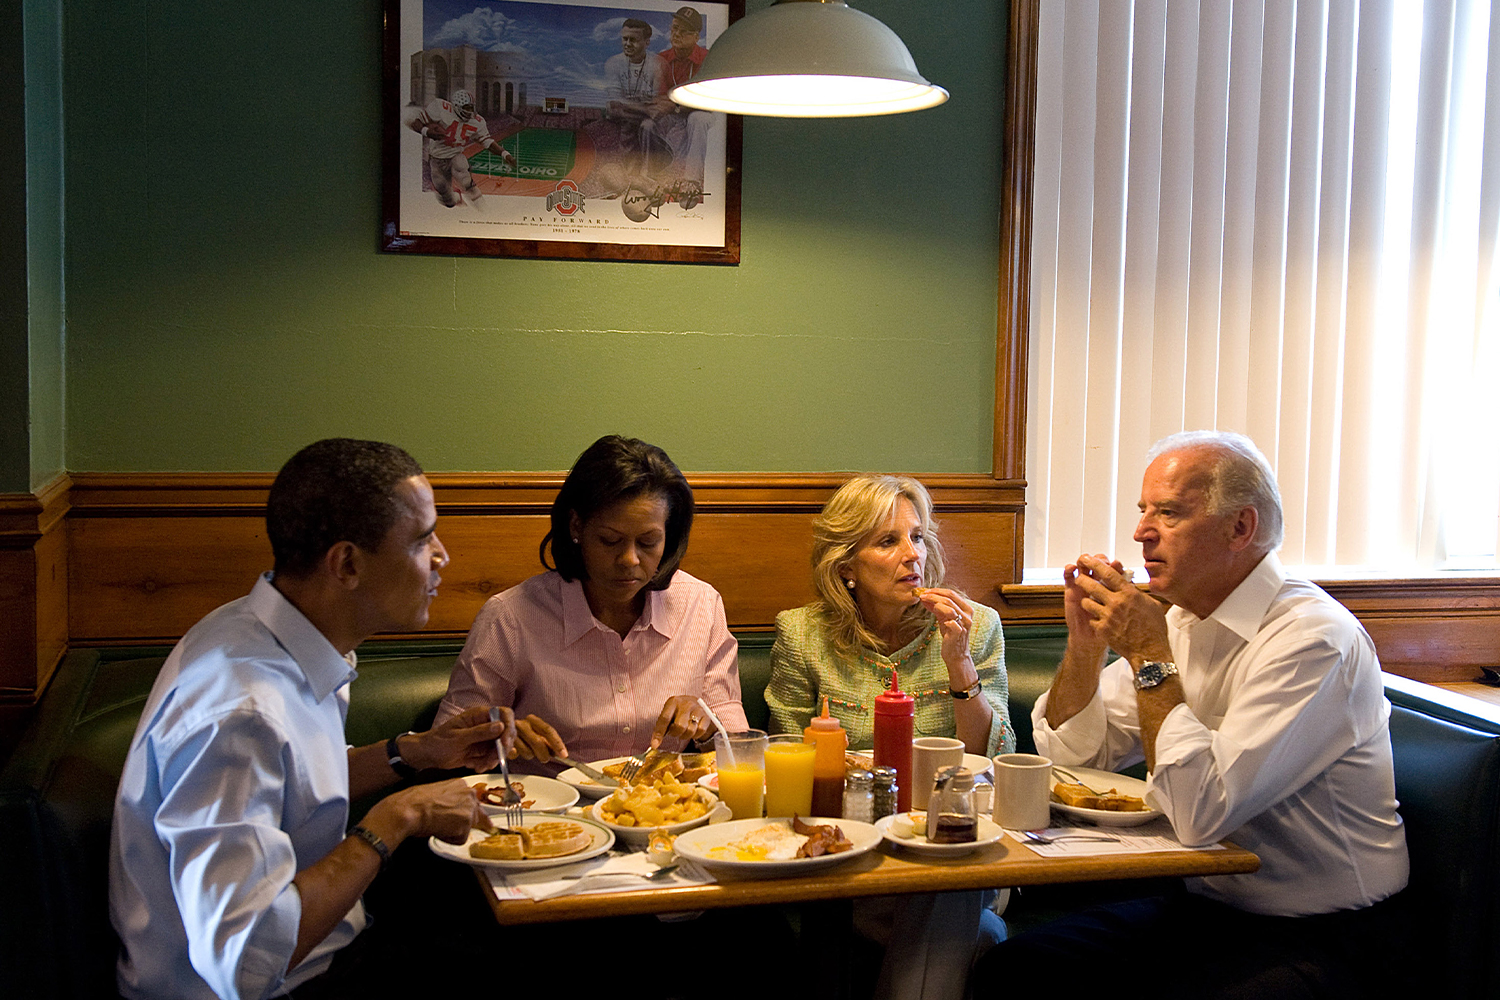 The Obama's and the Biden's out to lunch.